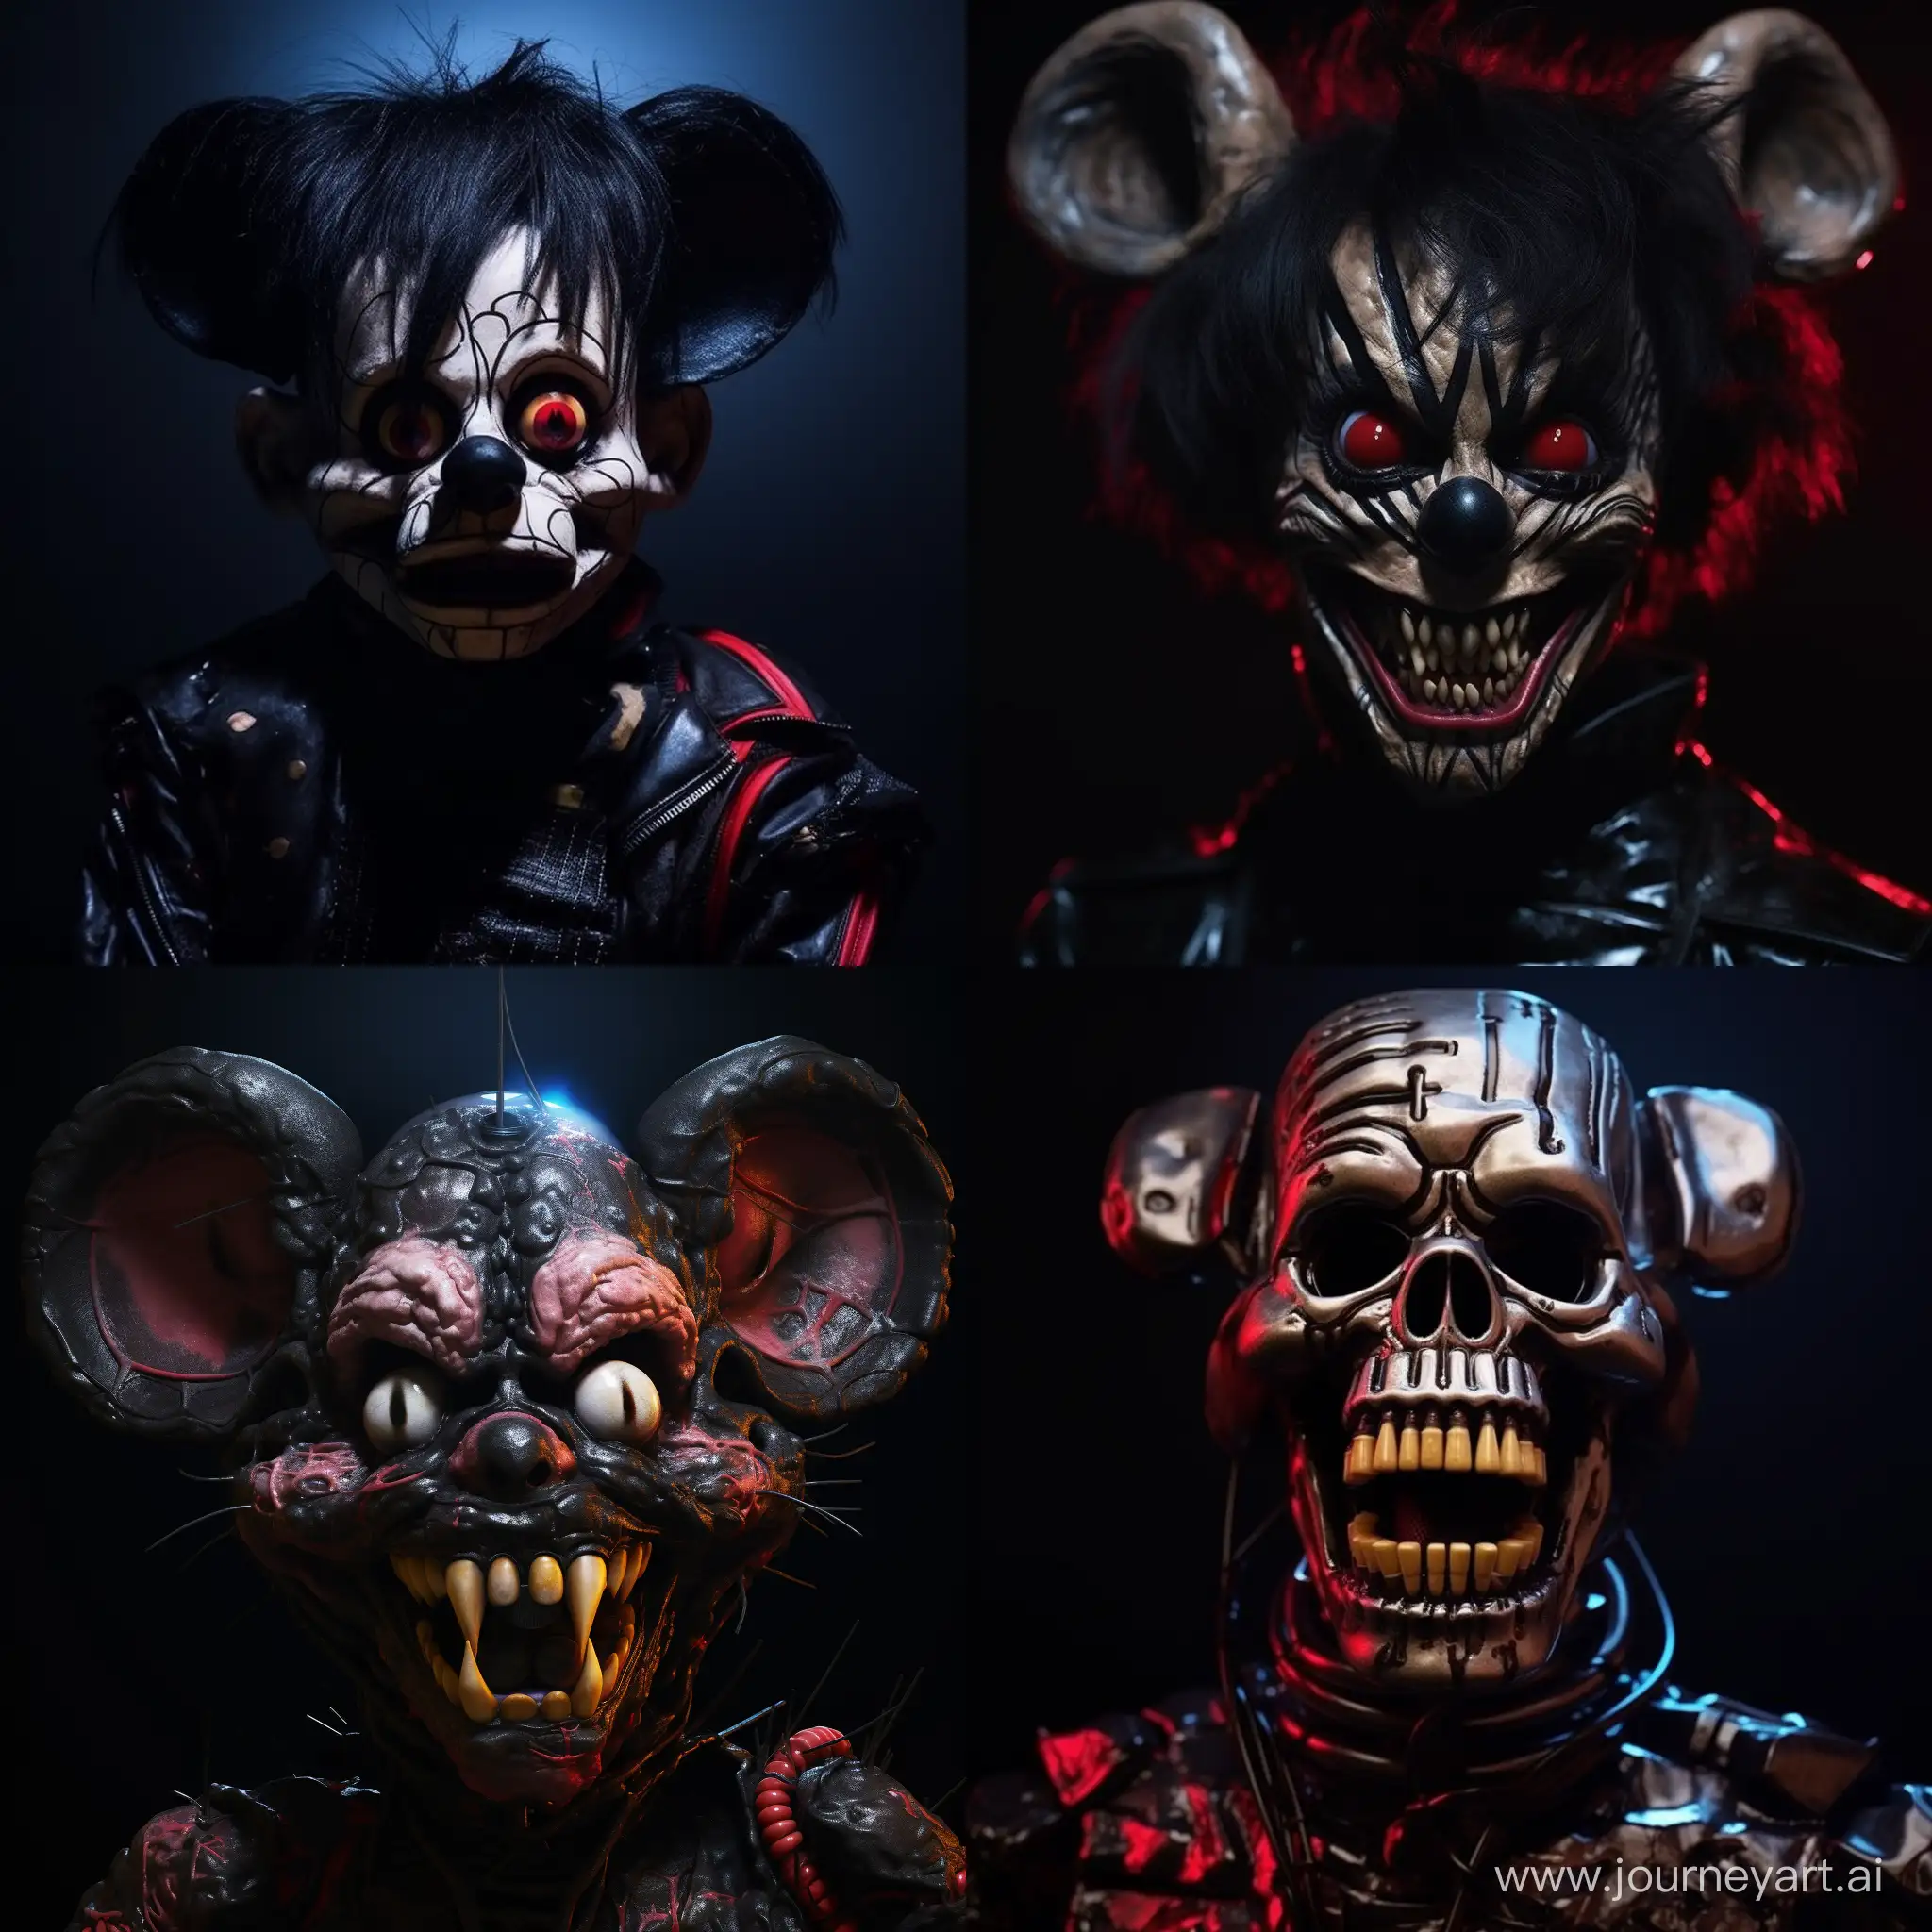 Sinister-Mickey-Mouseinspired-Creature-in-80s-Aesthetic-Closeup